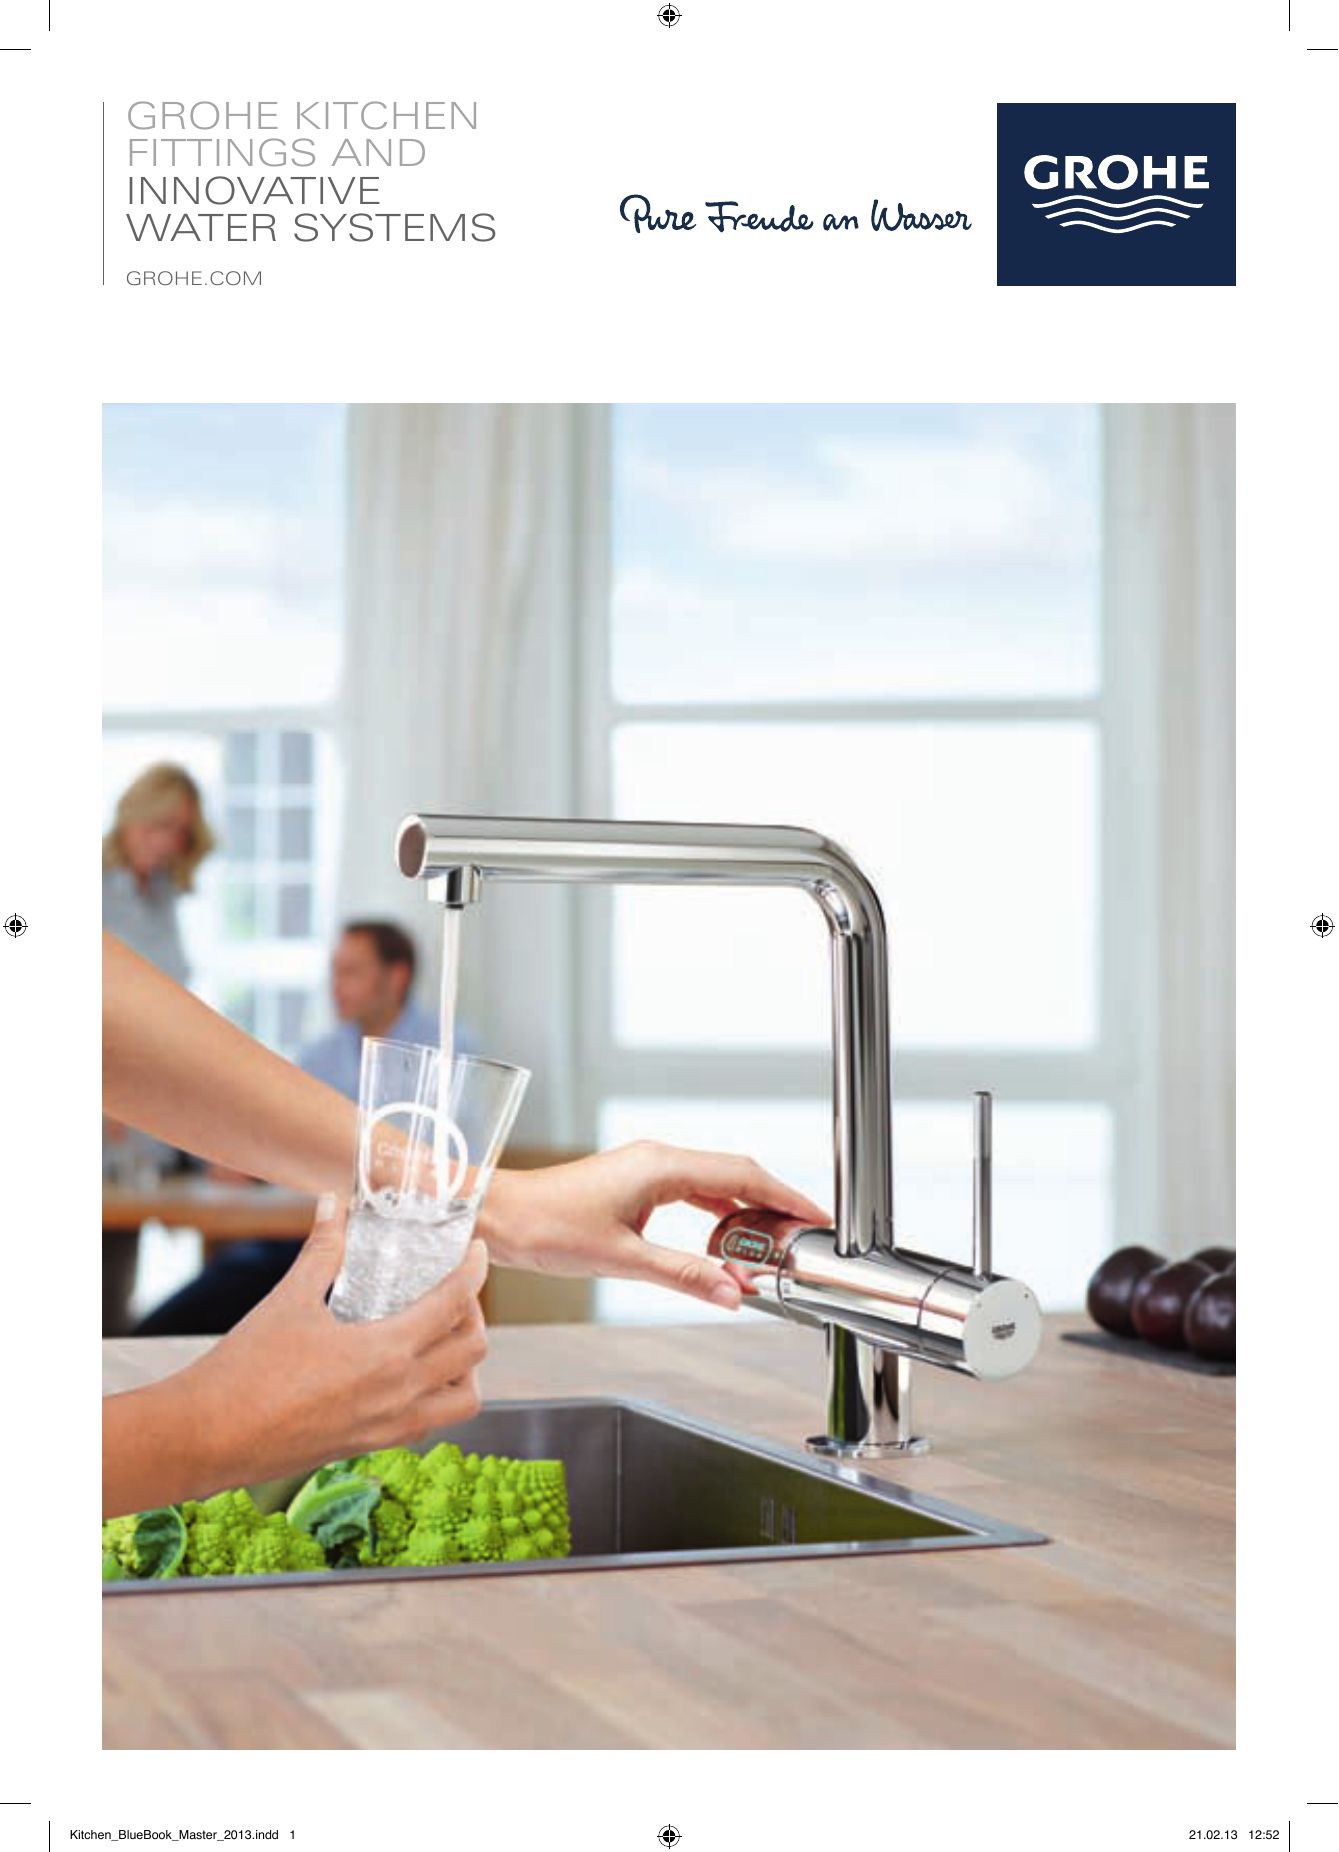 Decoderen lager Liever GROHE KITCHEN FITTINGS AND INNOVATIVE WATER SYSTEMS | Manualzz